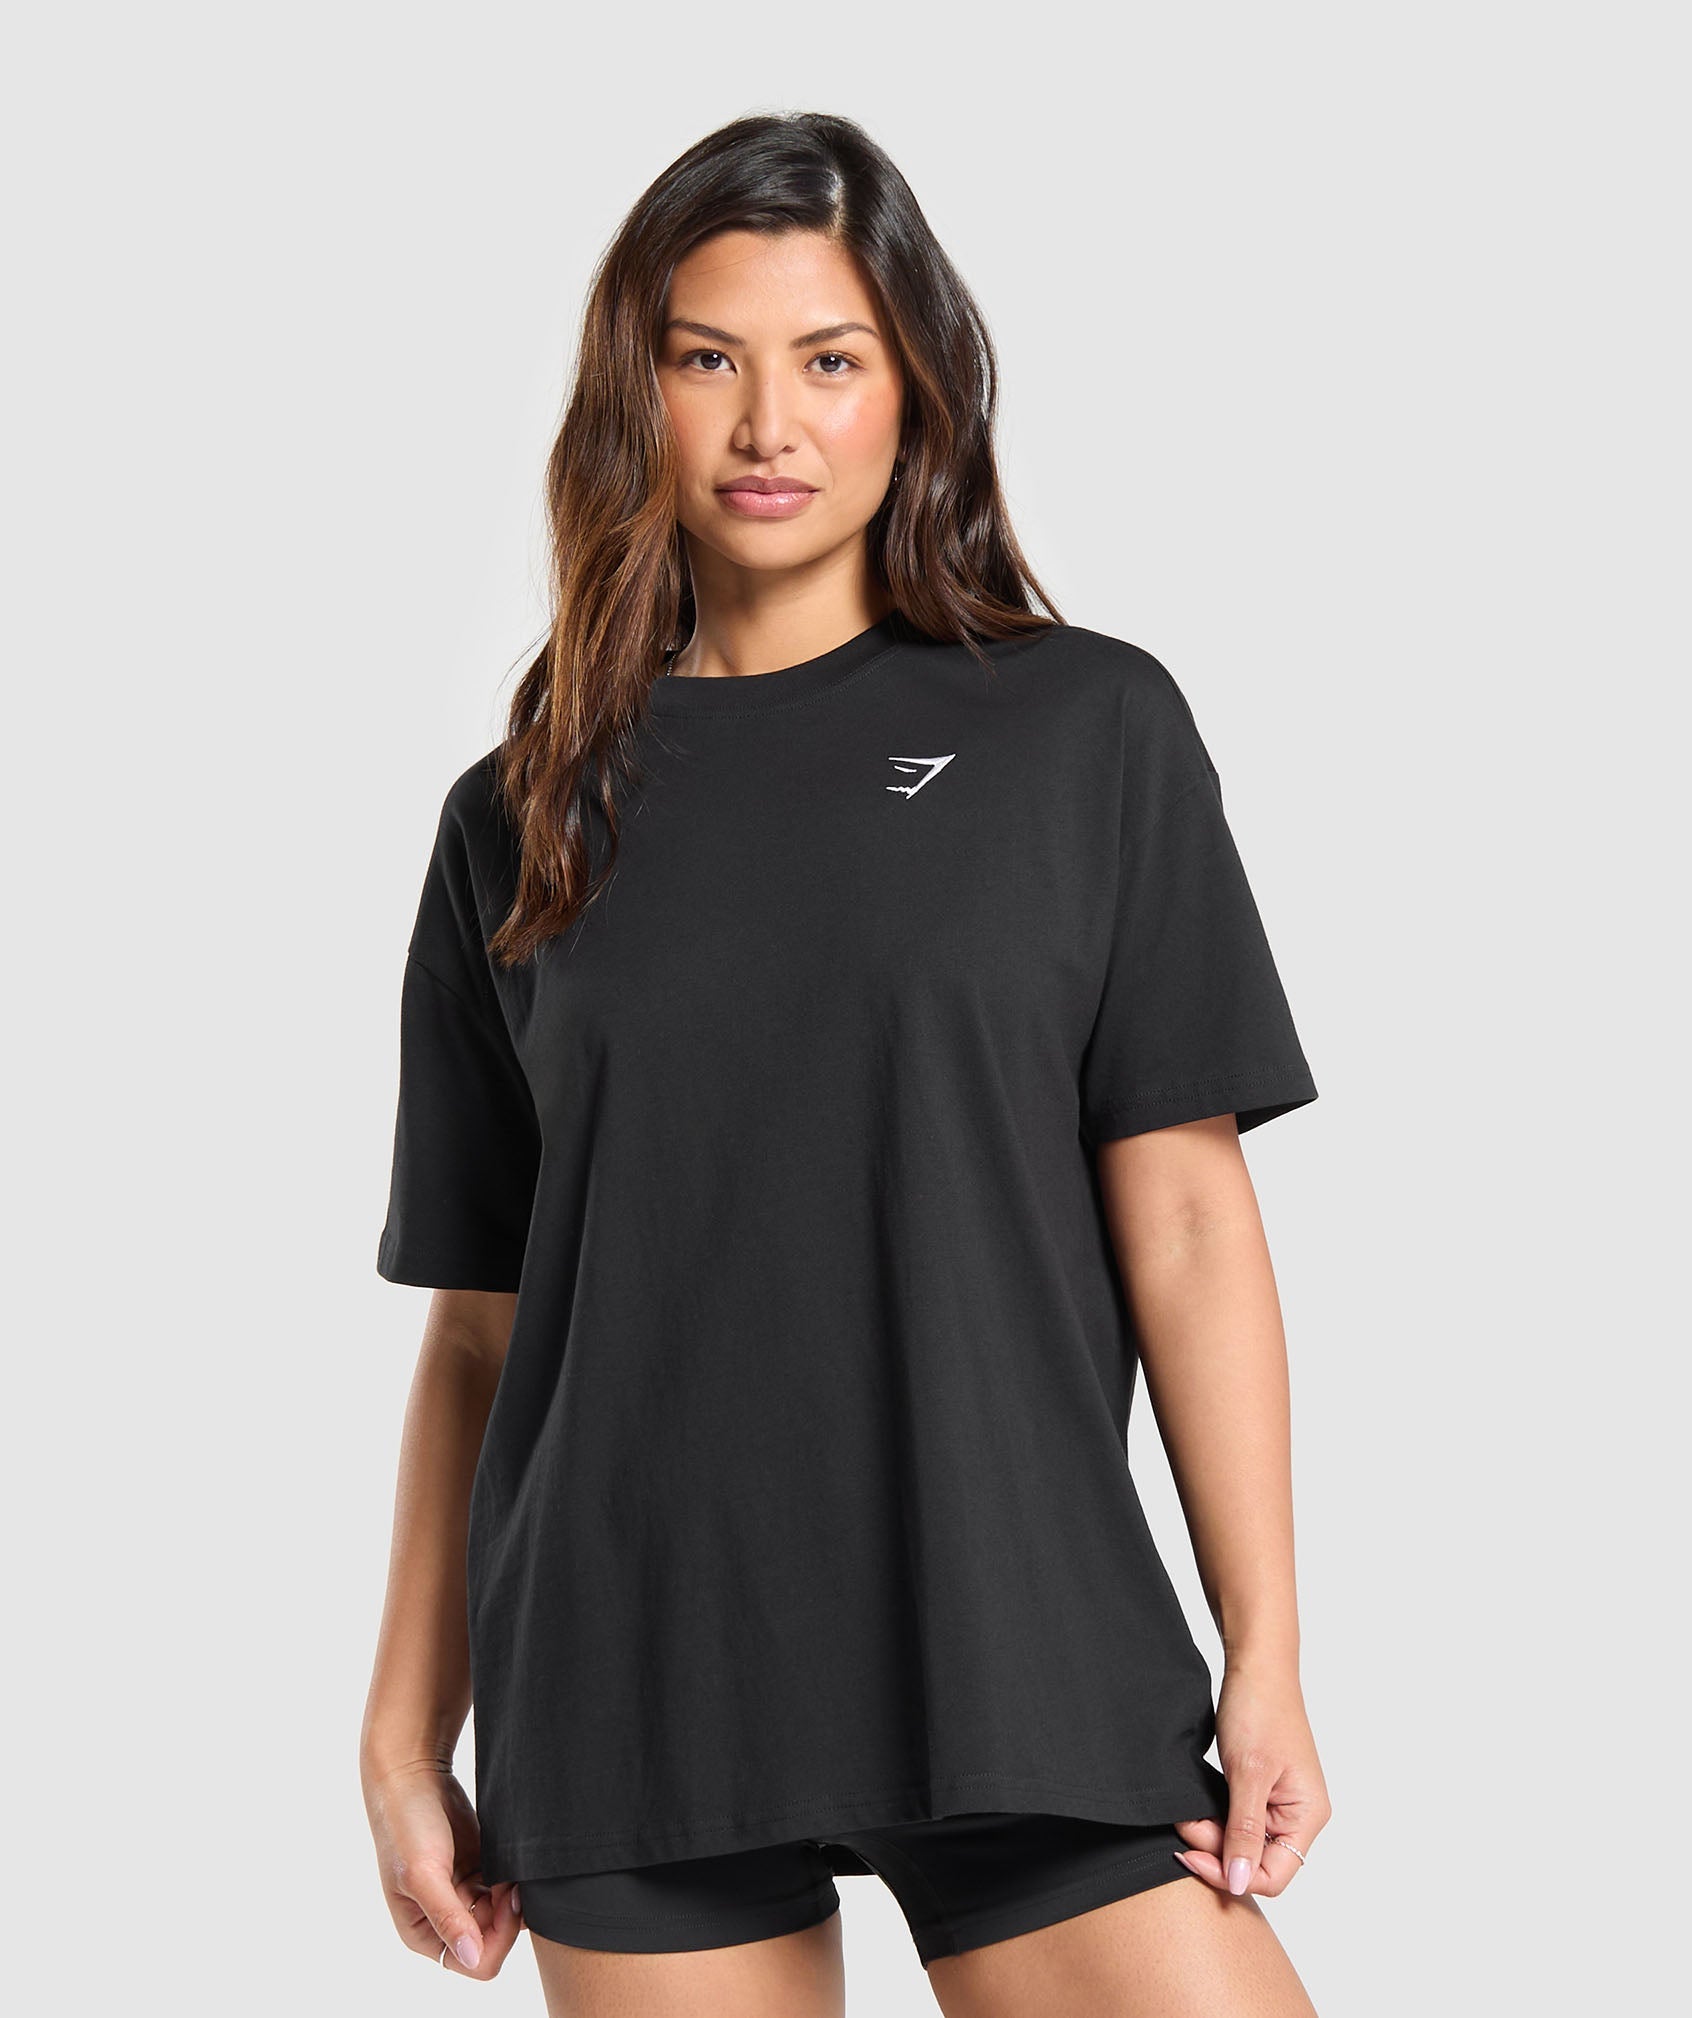 Training Oversized T-Shirt in Black is out of stock